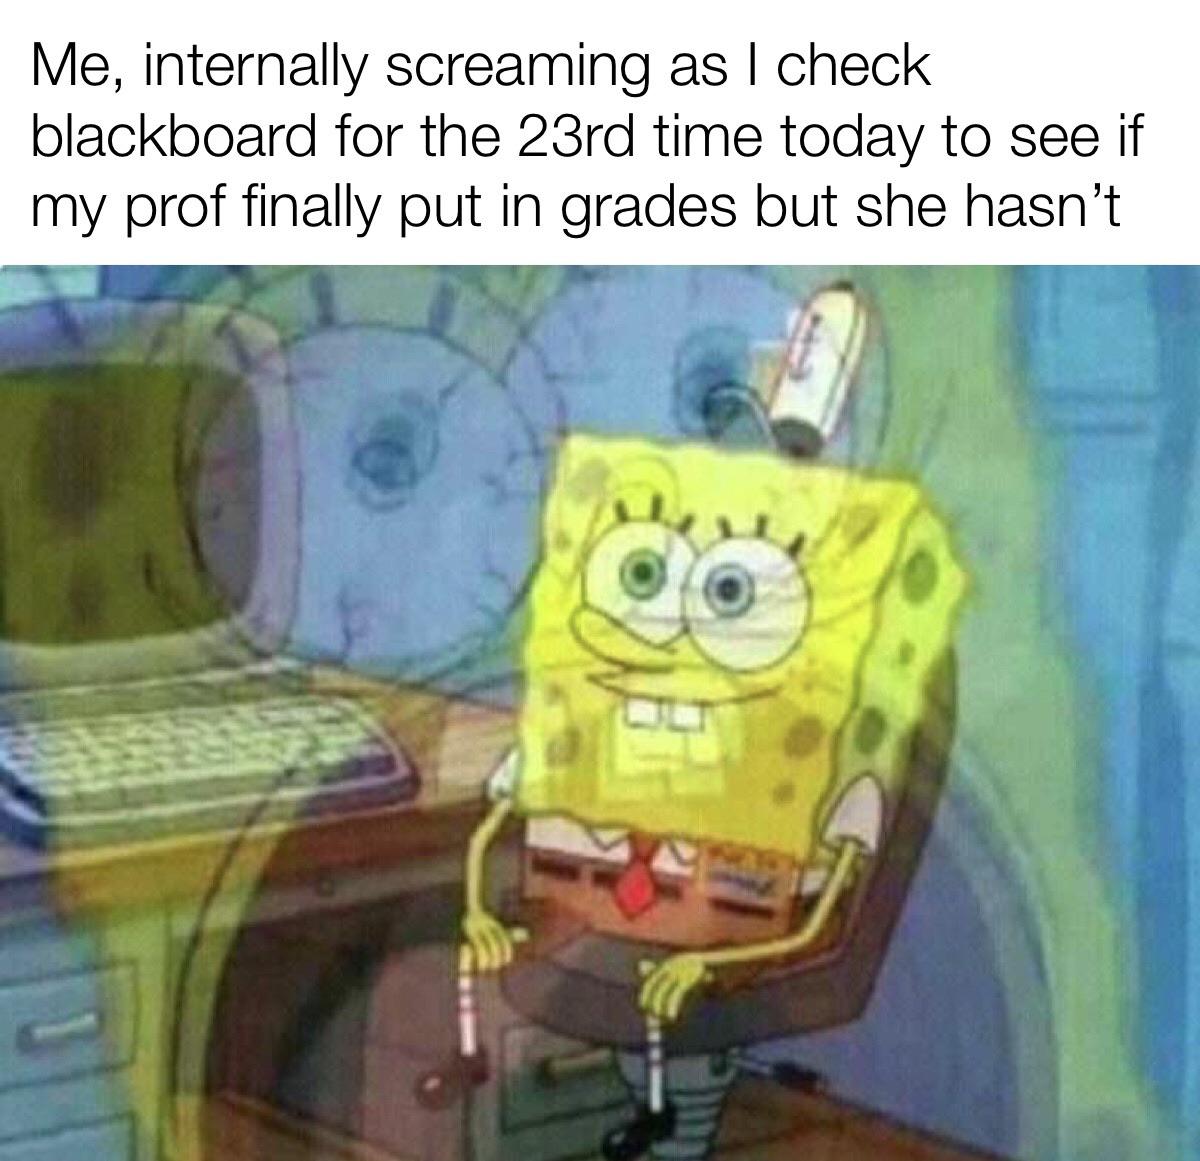 r/collegememes- college dank memes - silent screaming meme - Me, internally screaming as I check blackboard for the 23rd time today to see if my prof finally put in grades but she hasn't